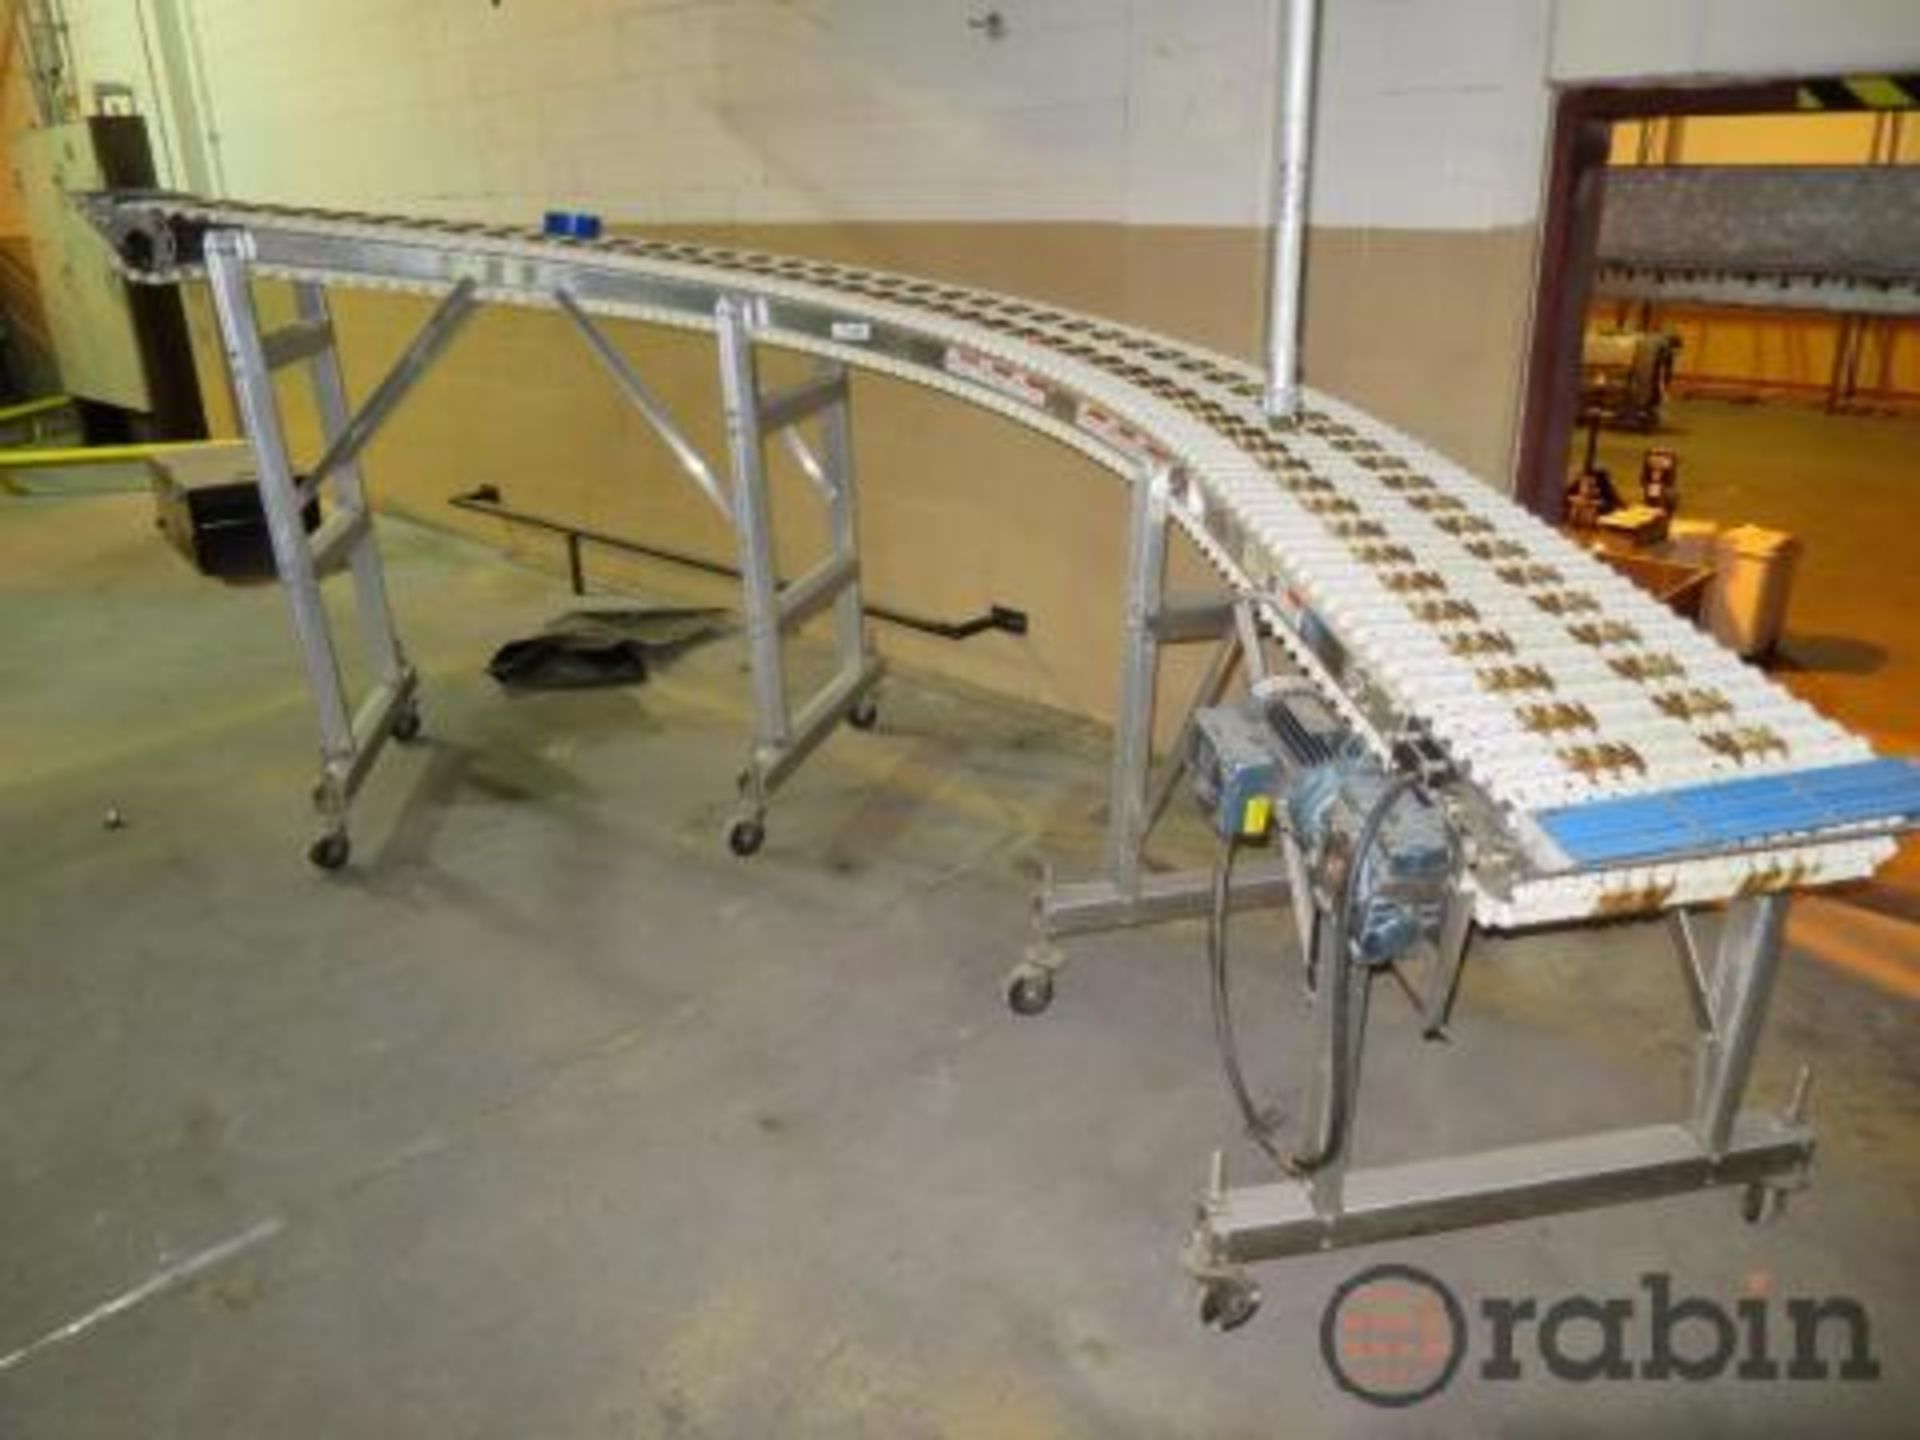 Designer System portable 90 degree decline conveyor, 86 Inch height at high point, 38" at low point, - Image 2 of 3